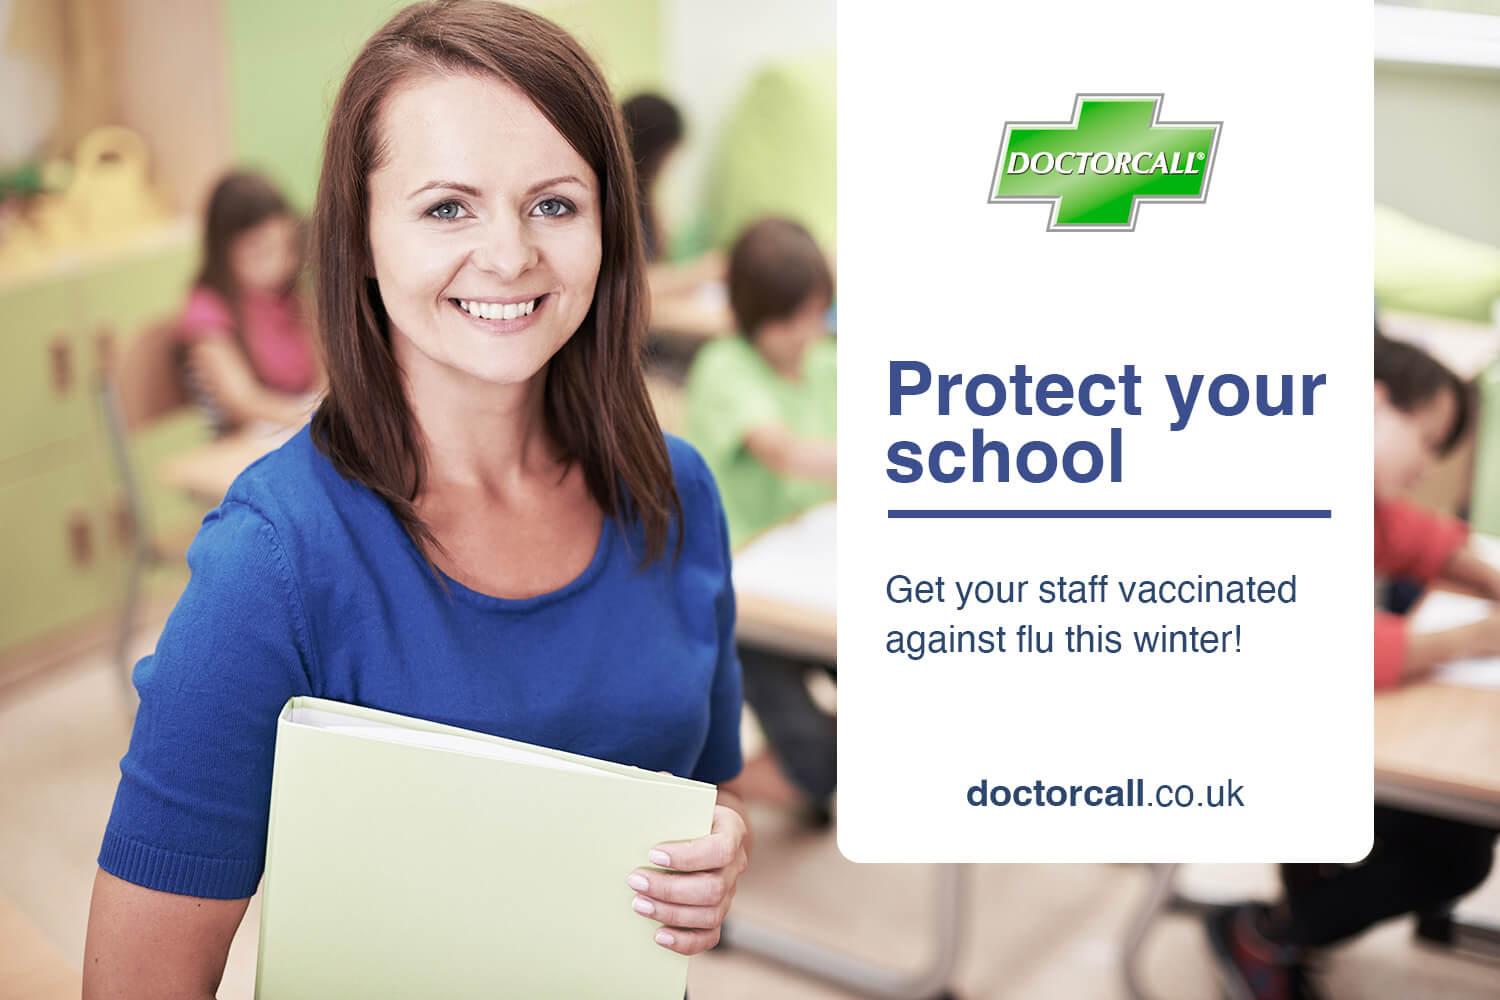 The flu vaccine gives the best protection against flu